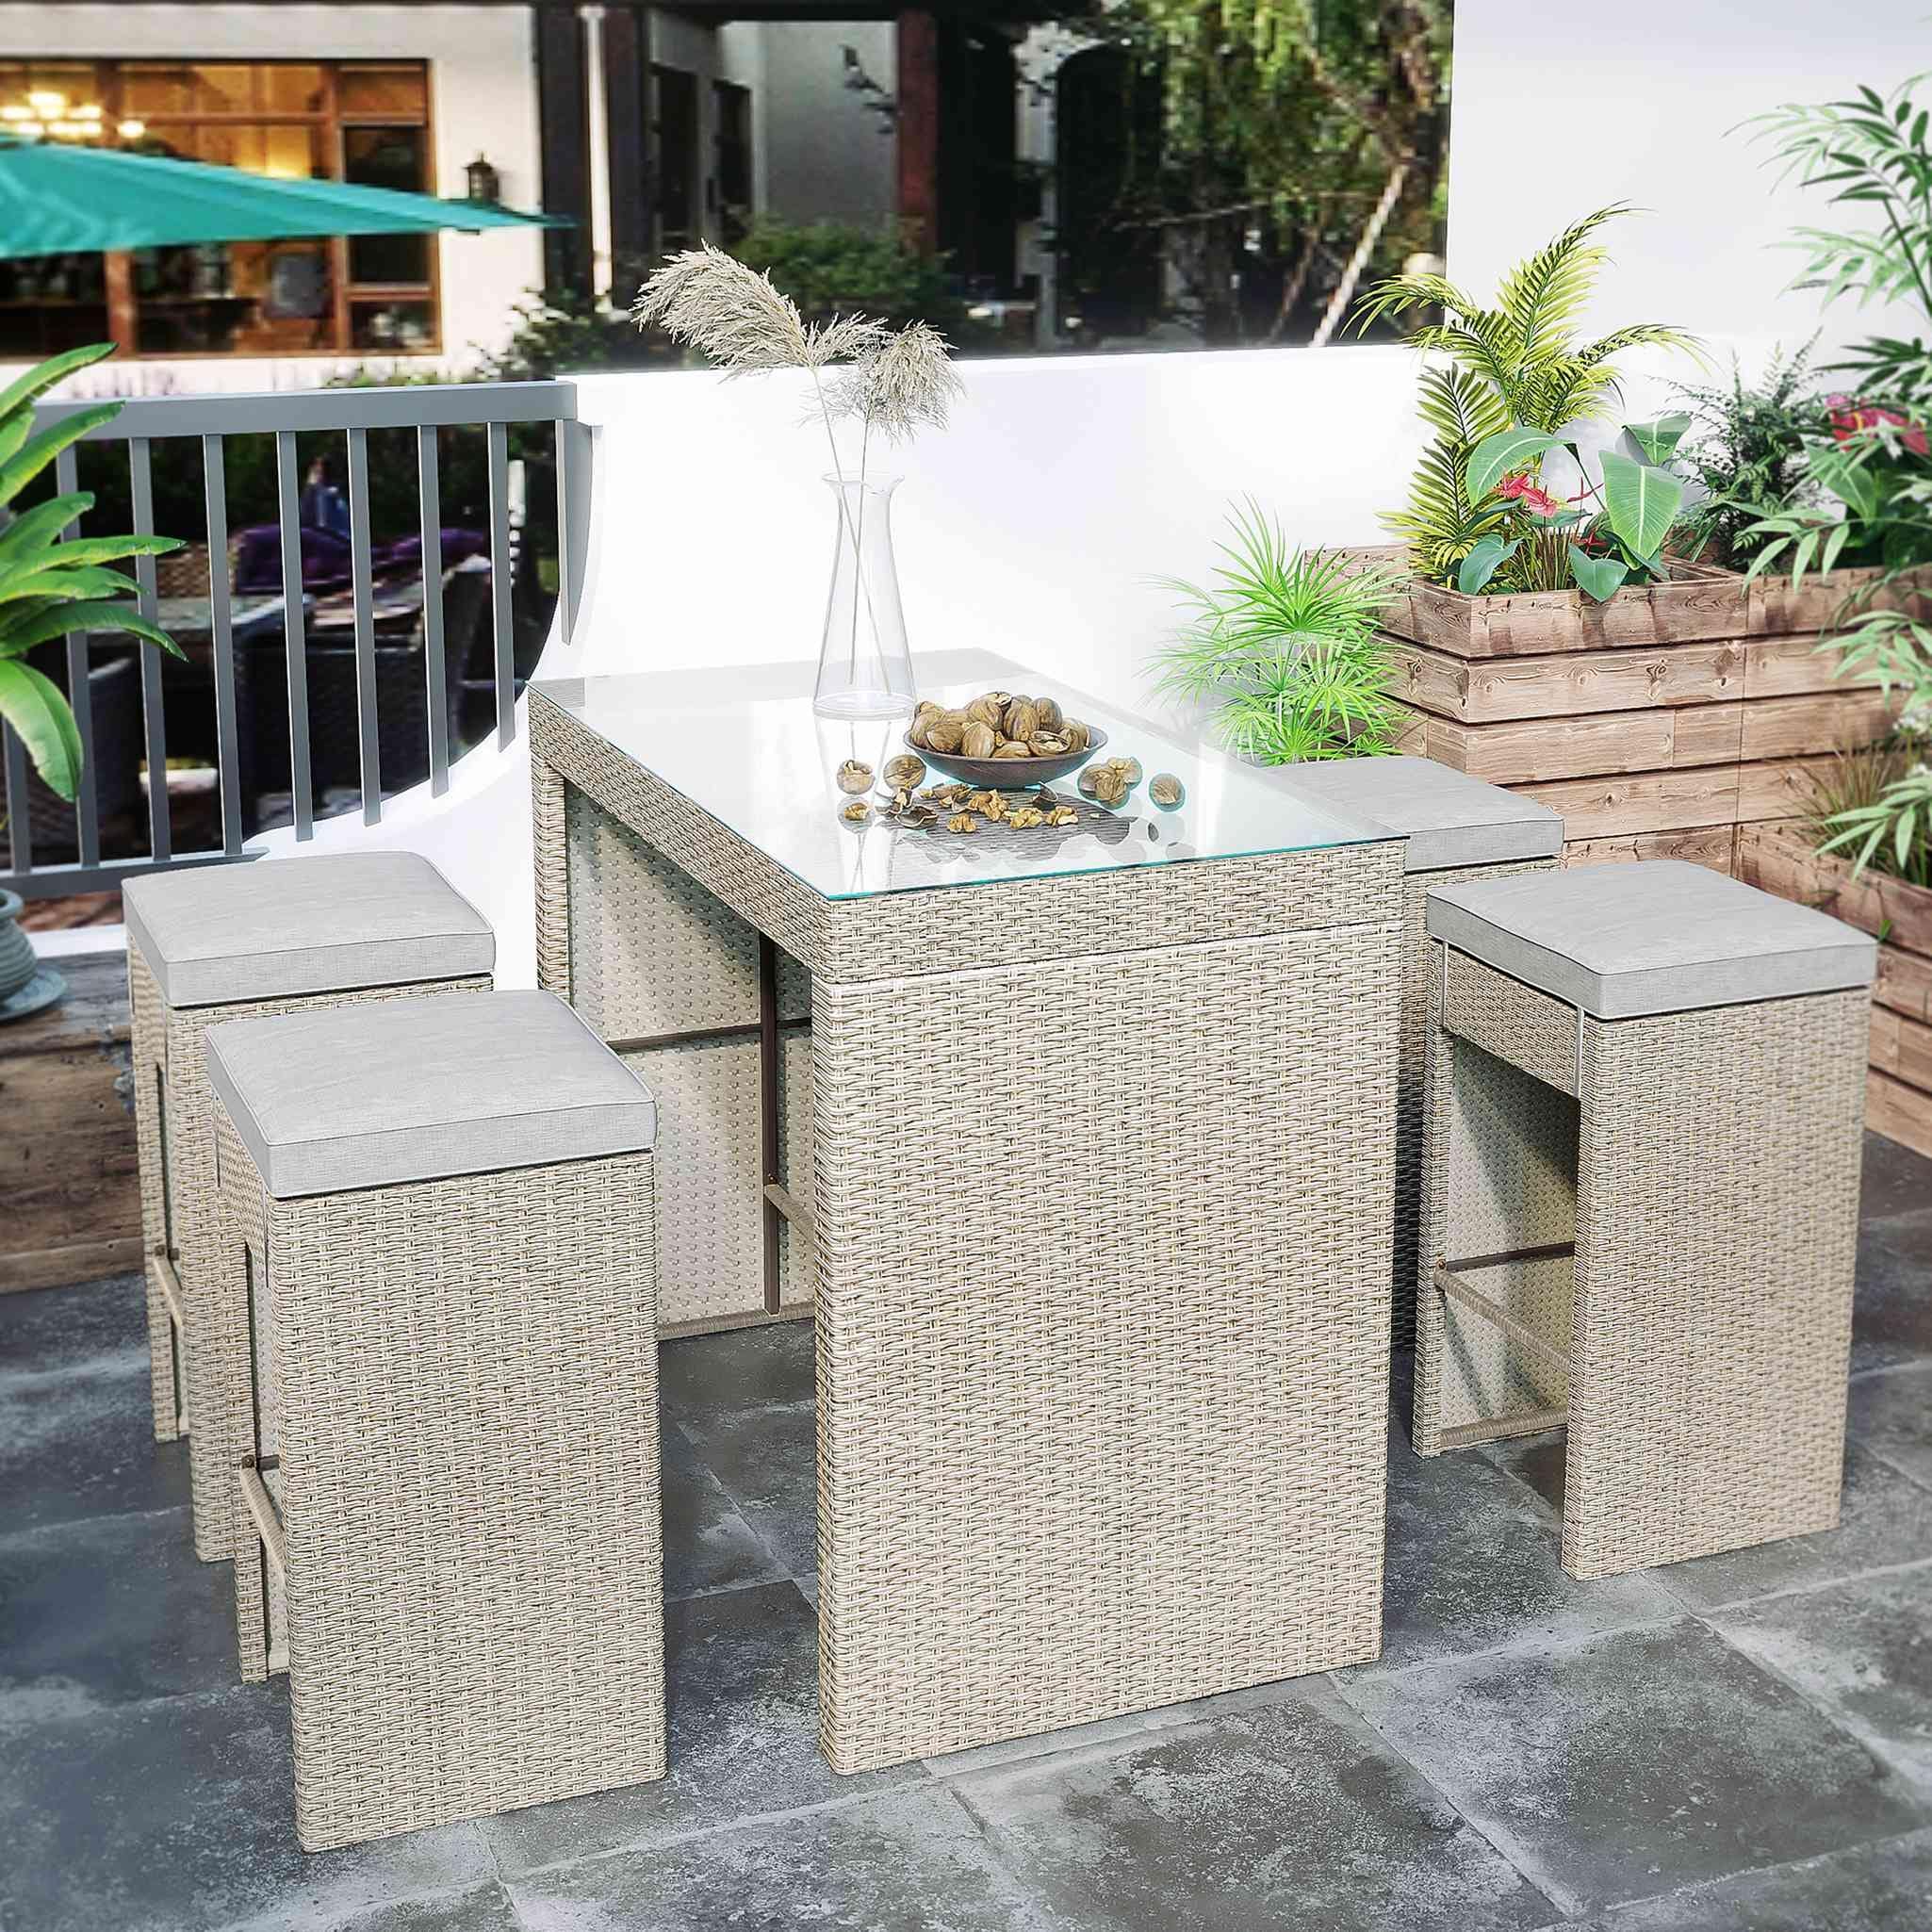 5-piece Rattan Outdoor Patio Furniture Set Bar Dining Table Set With 4 Stools